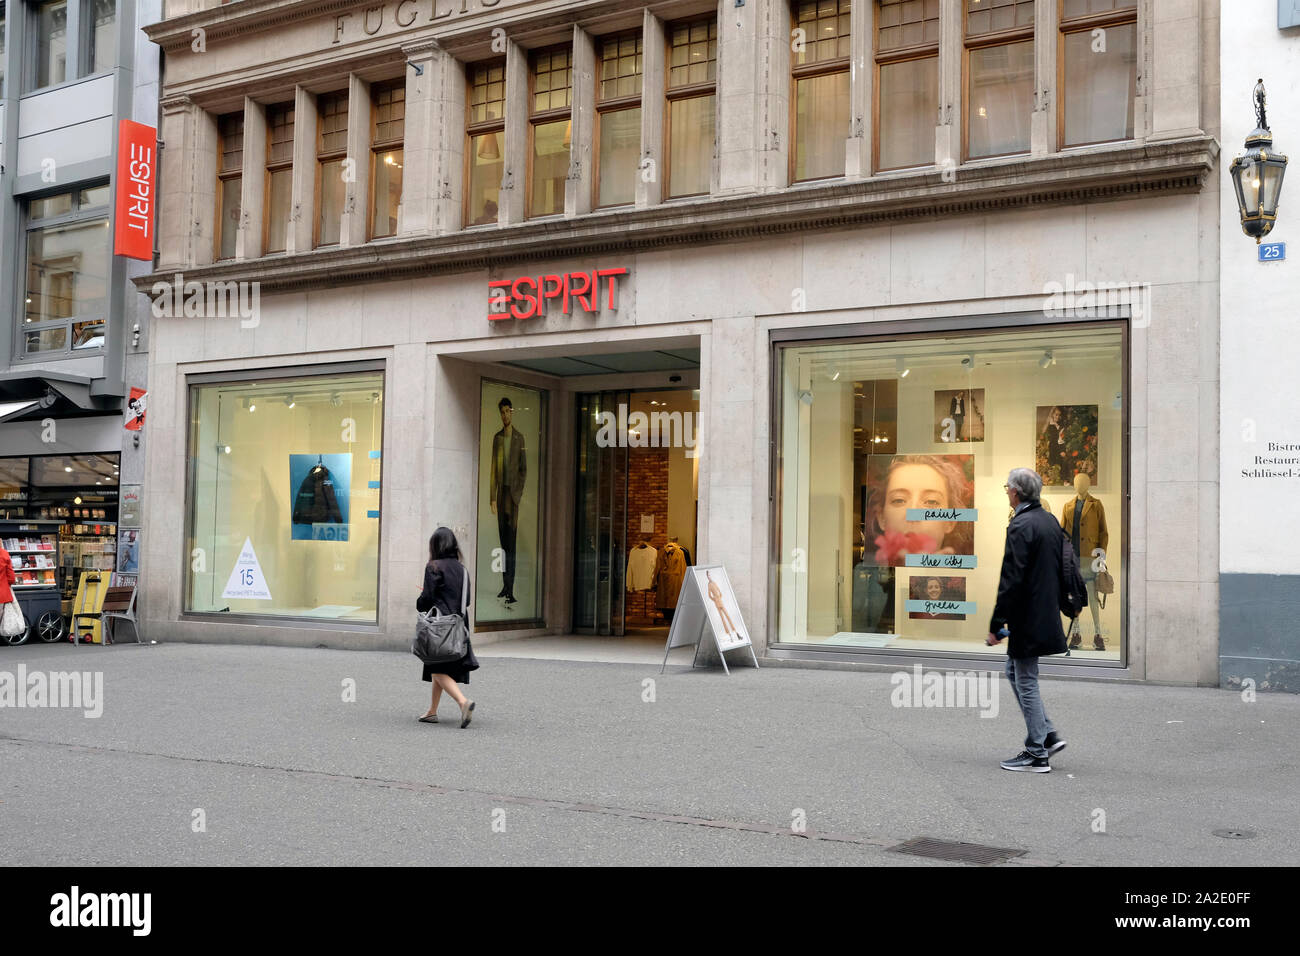 A view of Esprit fashion store in Basel, Switzerland Stock Photo - Alamy